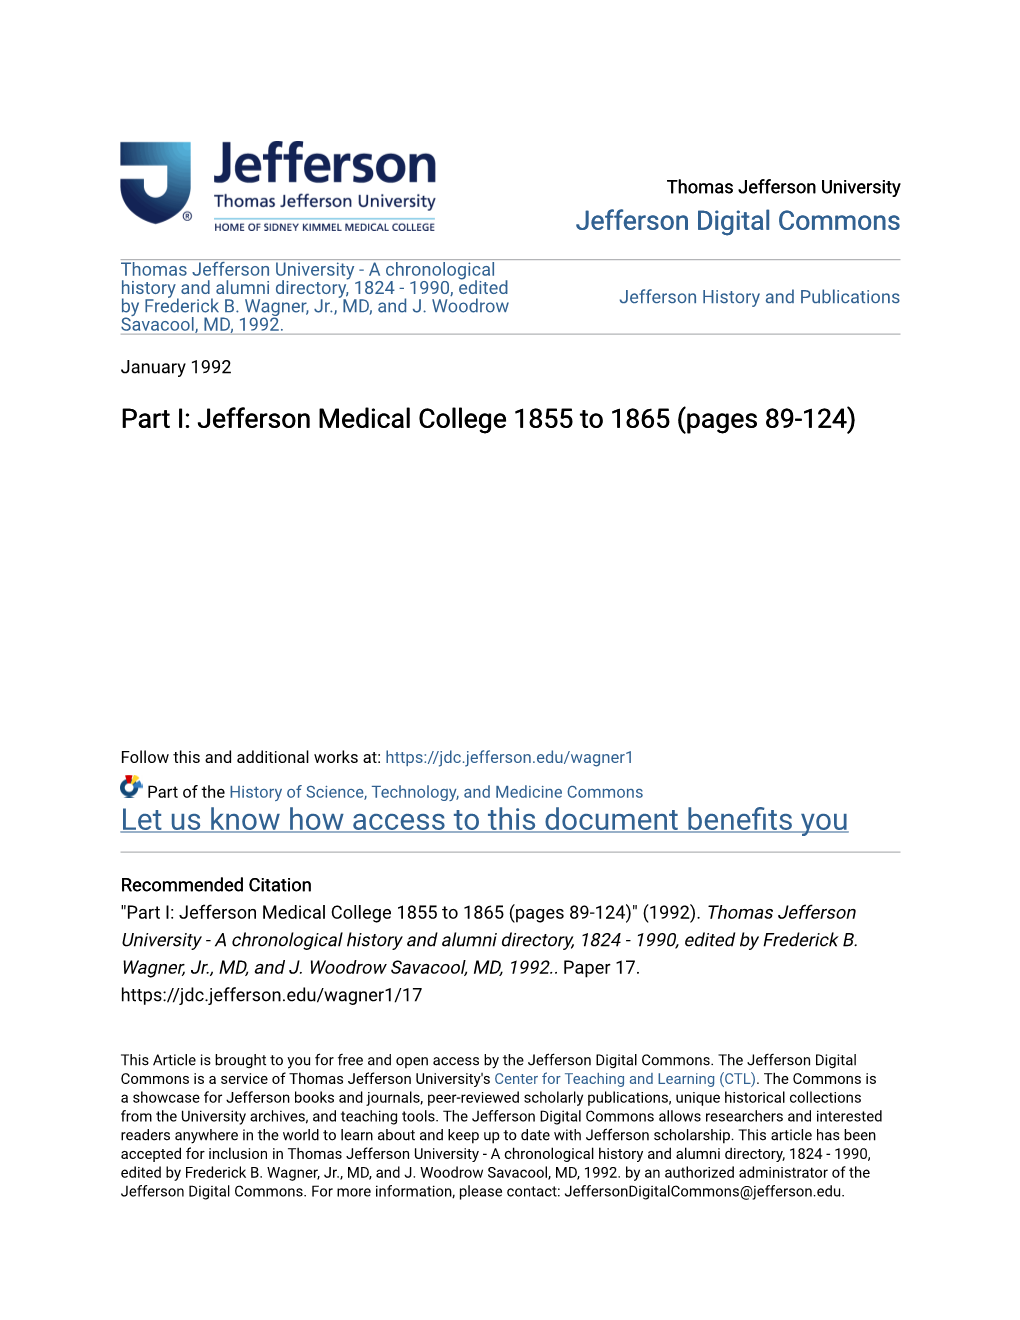 Part I: Jefferson Medical College 1855 to 1865 (Pages 89-124)